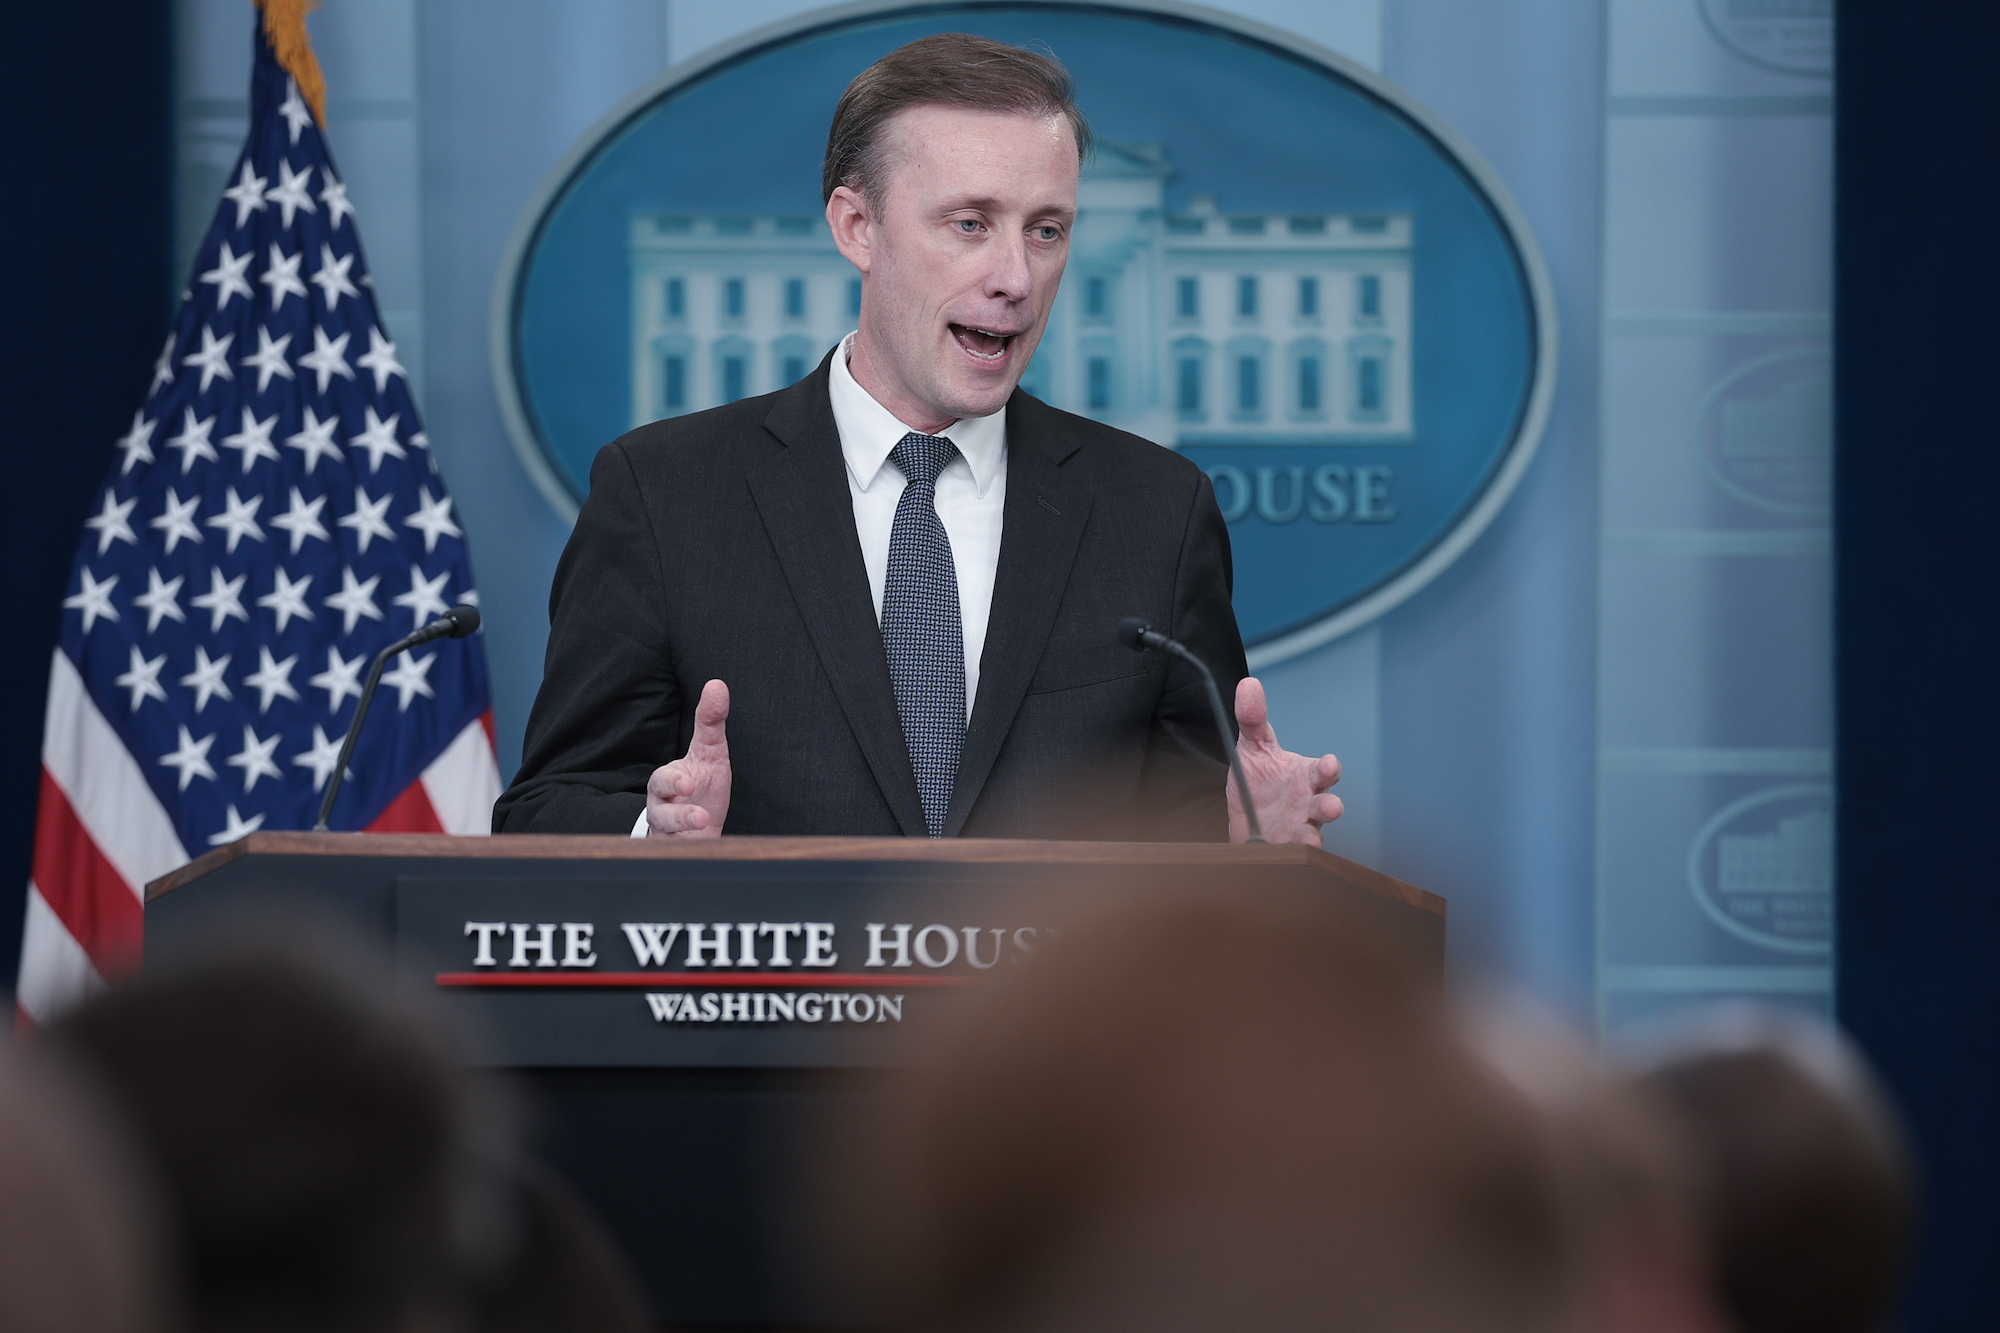 National Security Advisor Jake Sullivan answers questions during a press briefing at the White House on Monday.